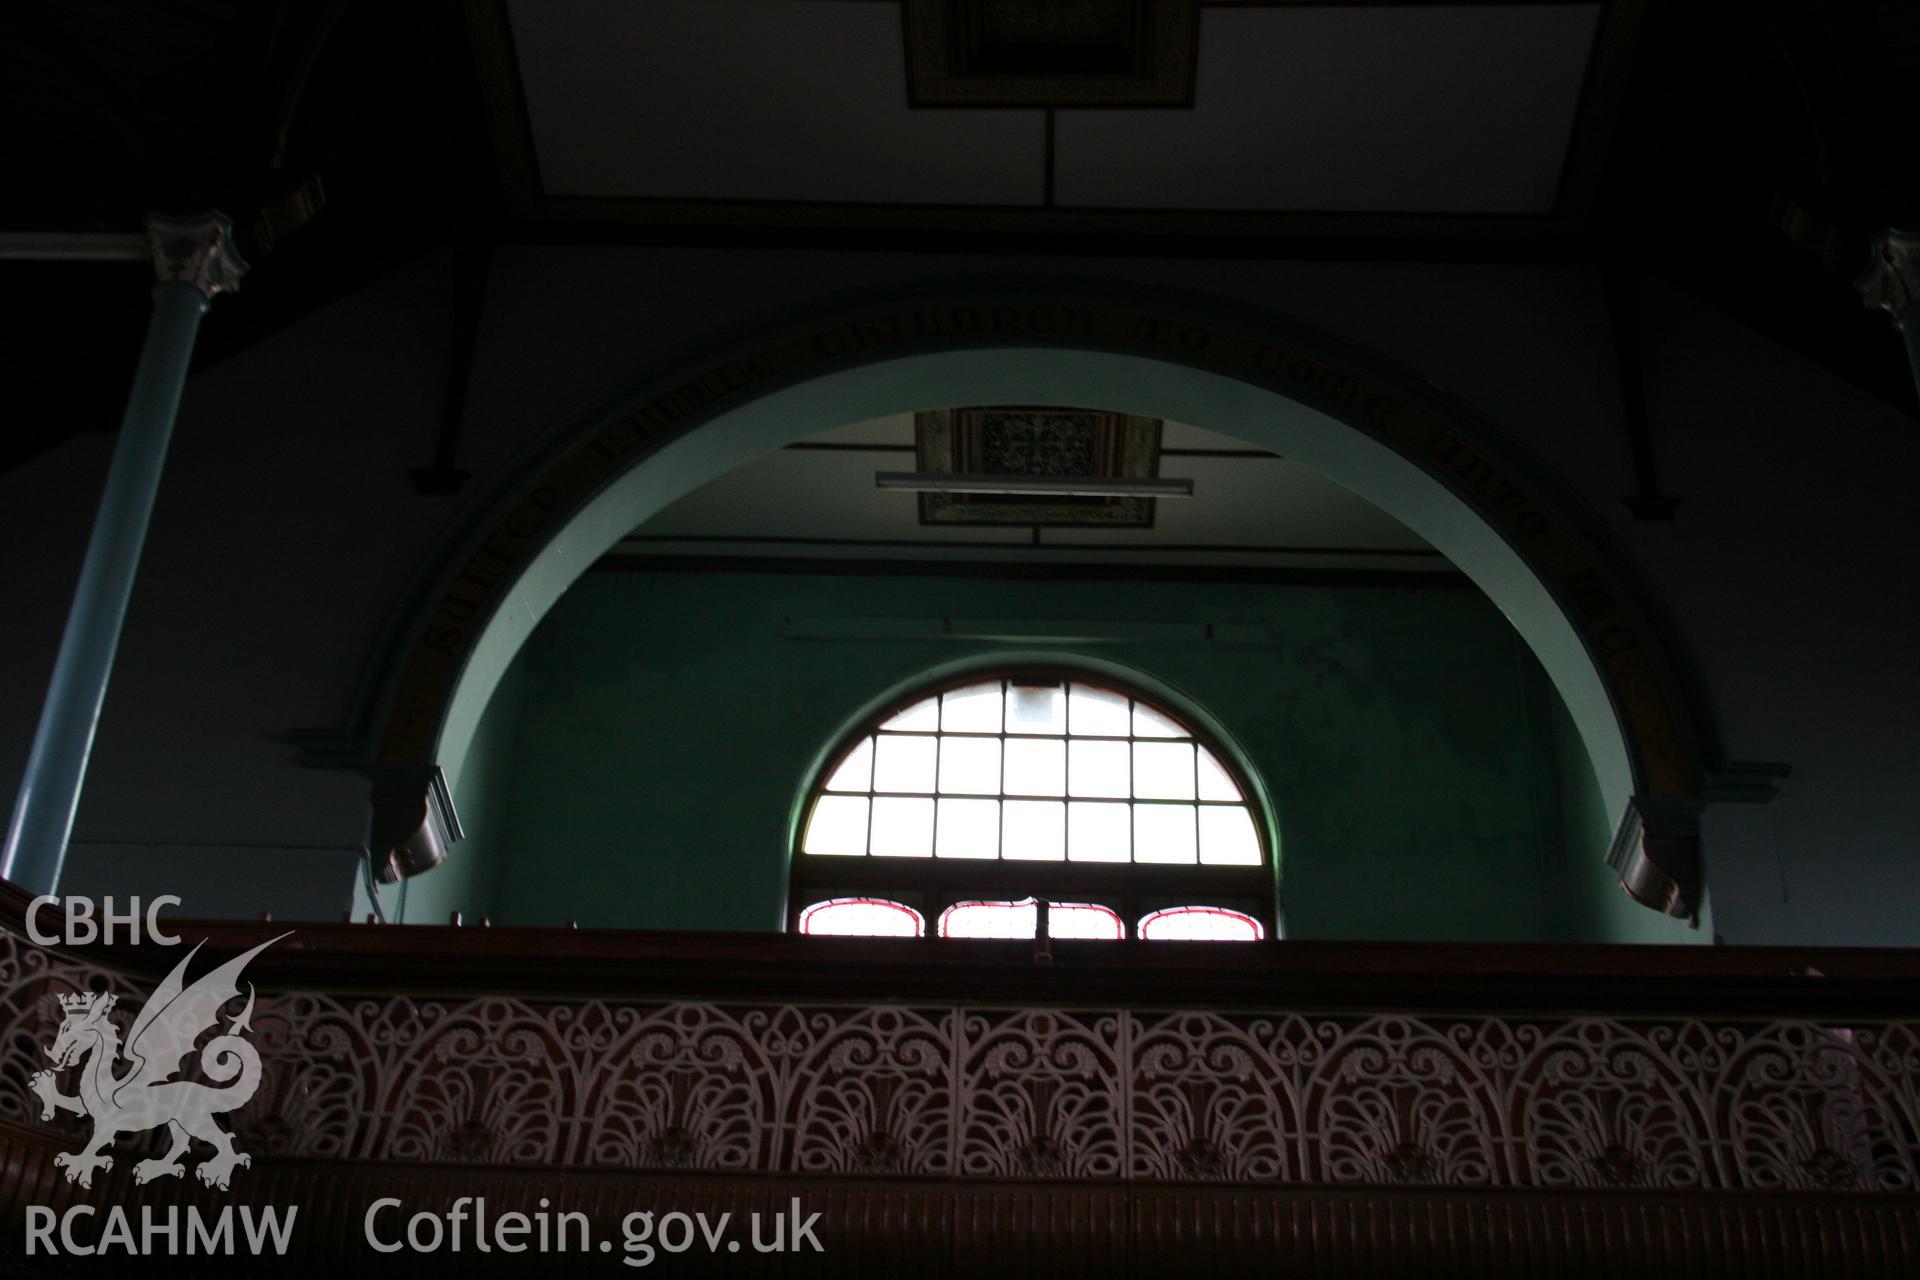 Hanbury Road baptist chapel, Bargoed, digital colour photograph showing interior, received in the course of Emergency Recording case ref no RCS2/1/2247.